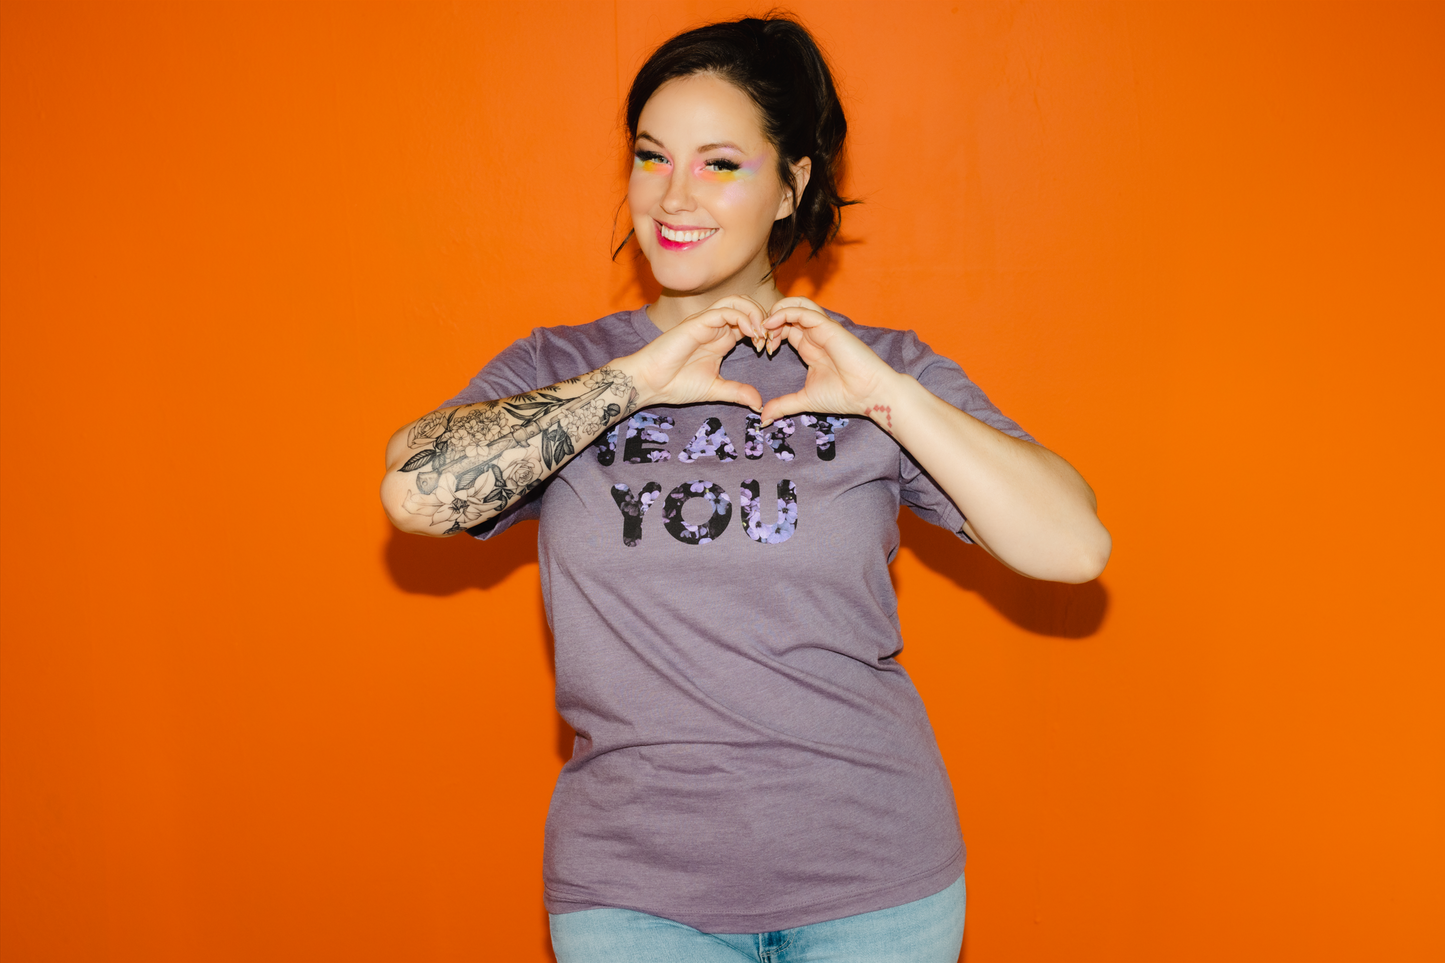 Purple Floral Heart You Tee - Unisex